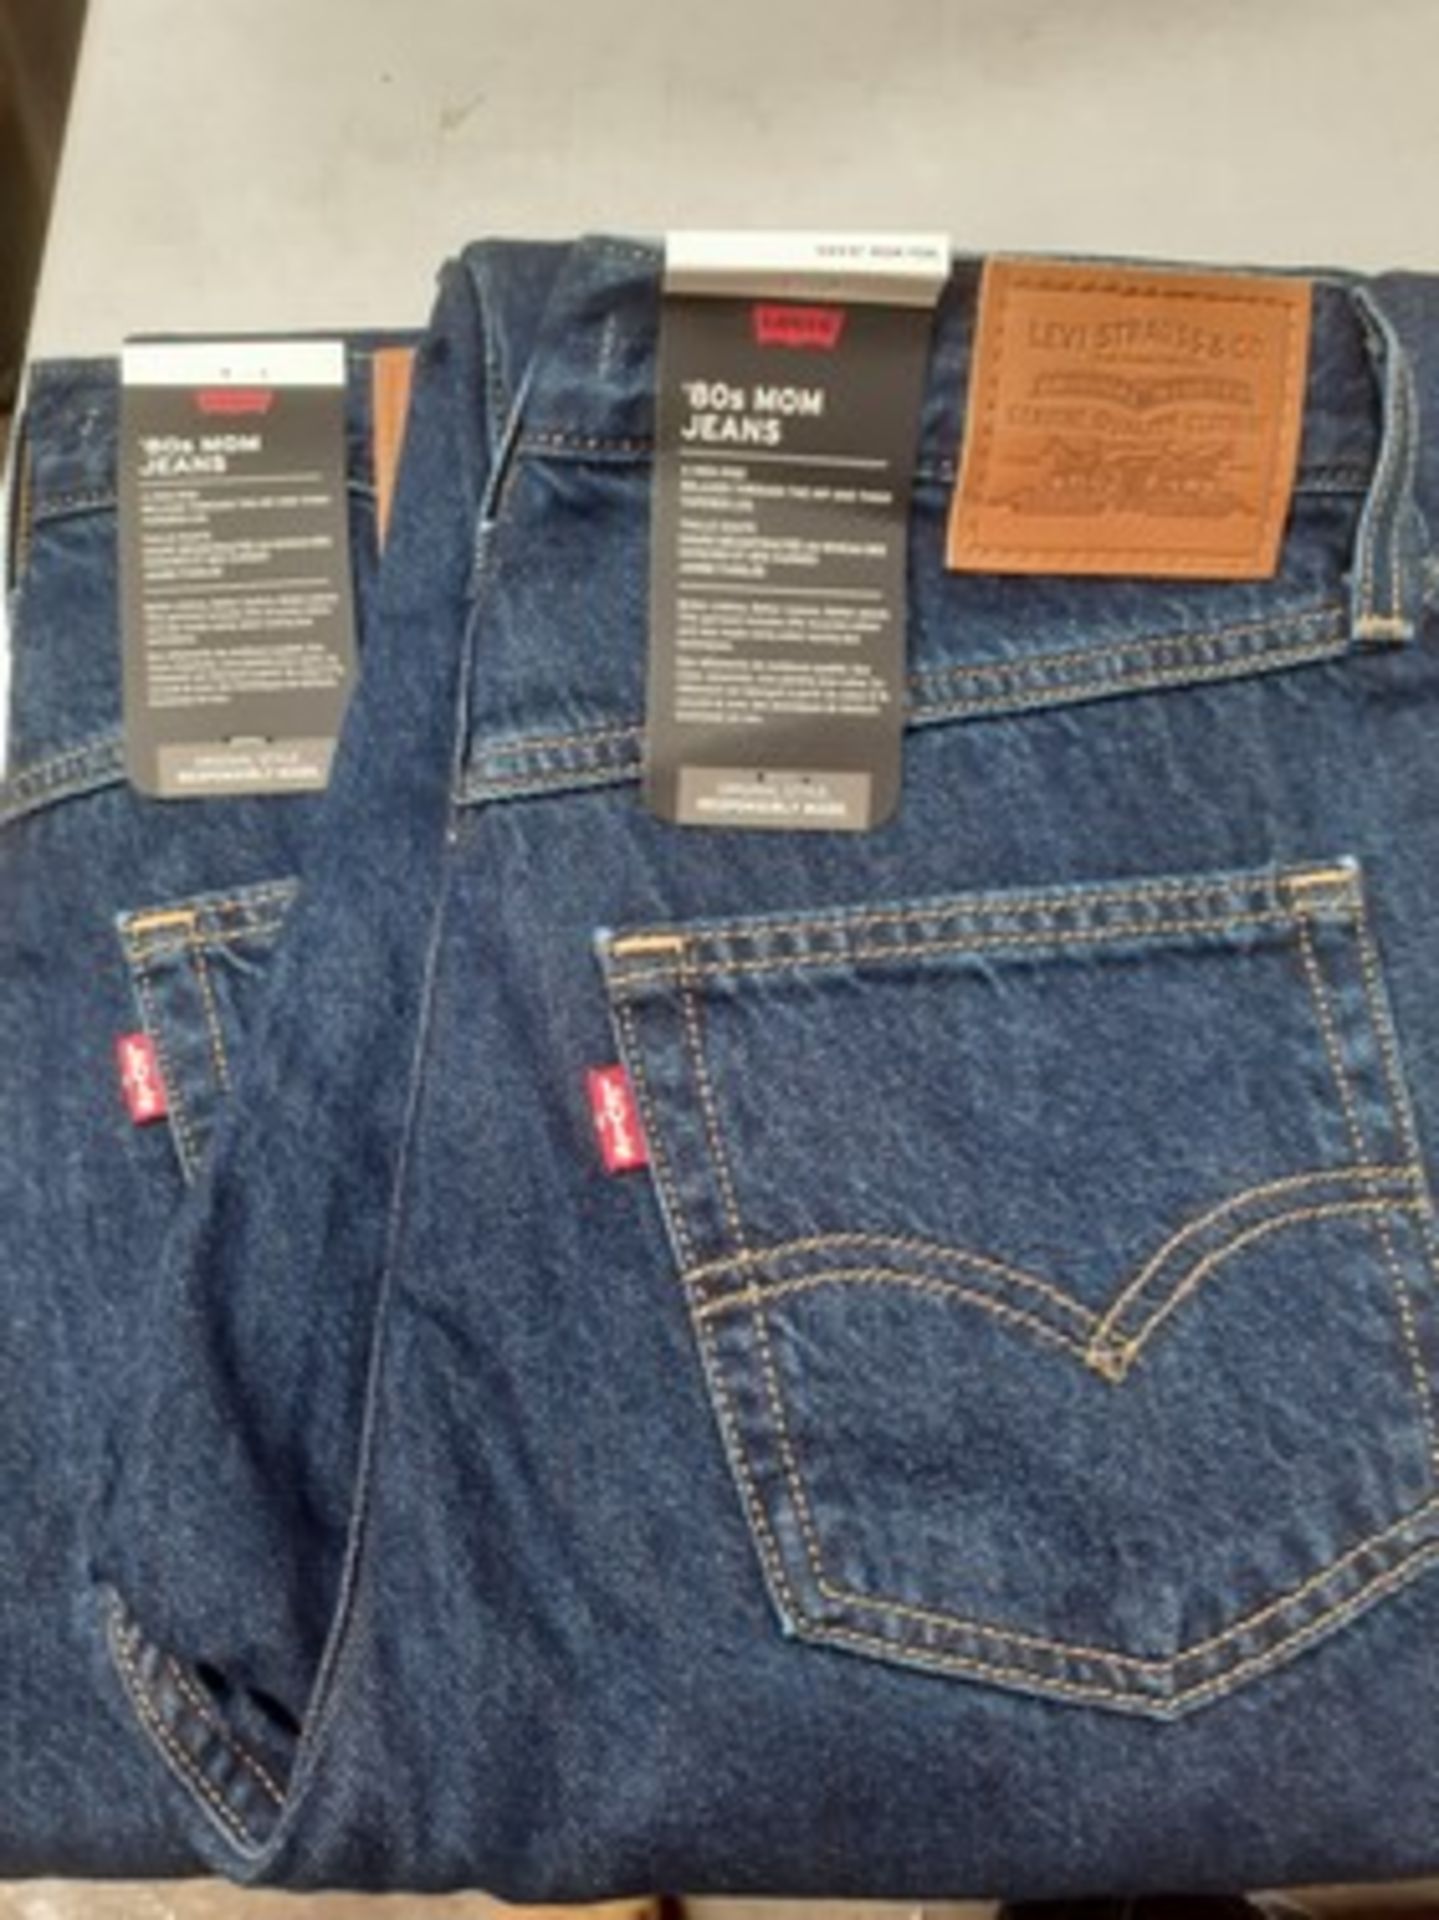 2 x pairs of Levis 80's Mom jeans, sizes 29 x 30 - new with tags (E8B)